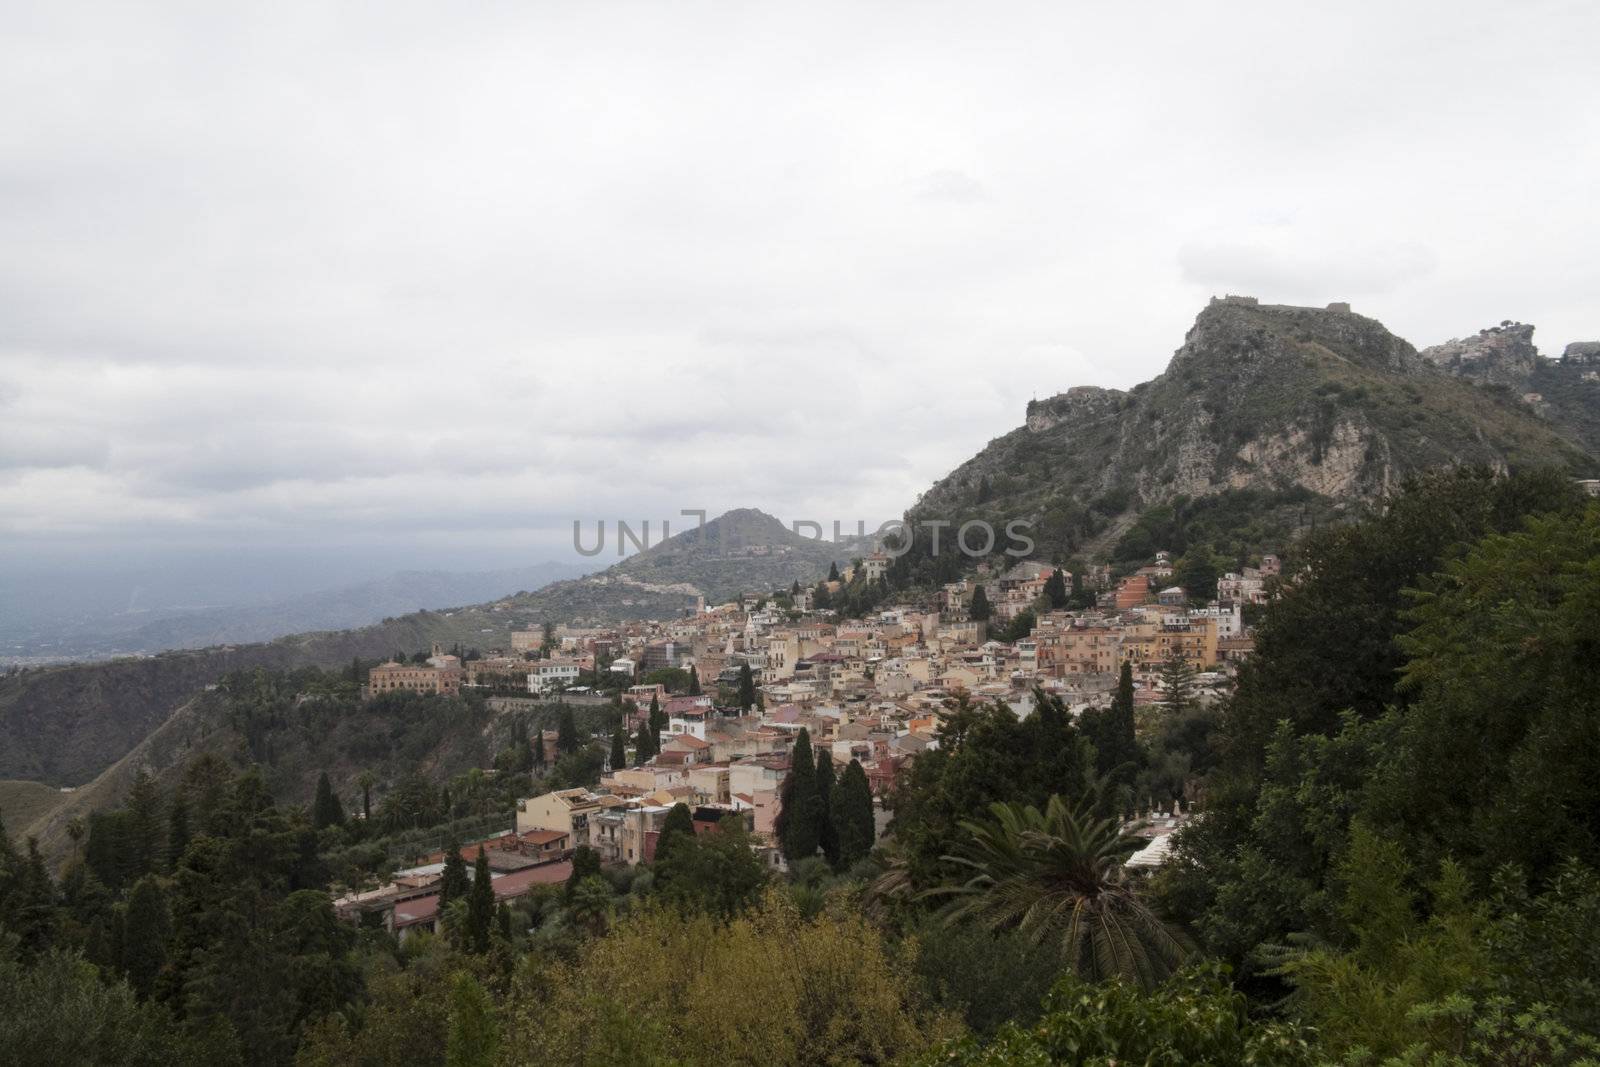 Looking over the overcast hills of Messina, Italy